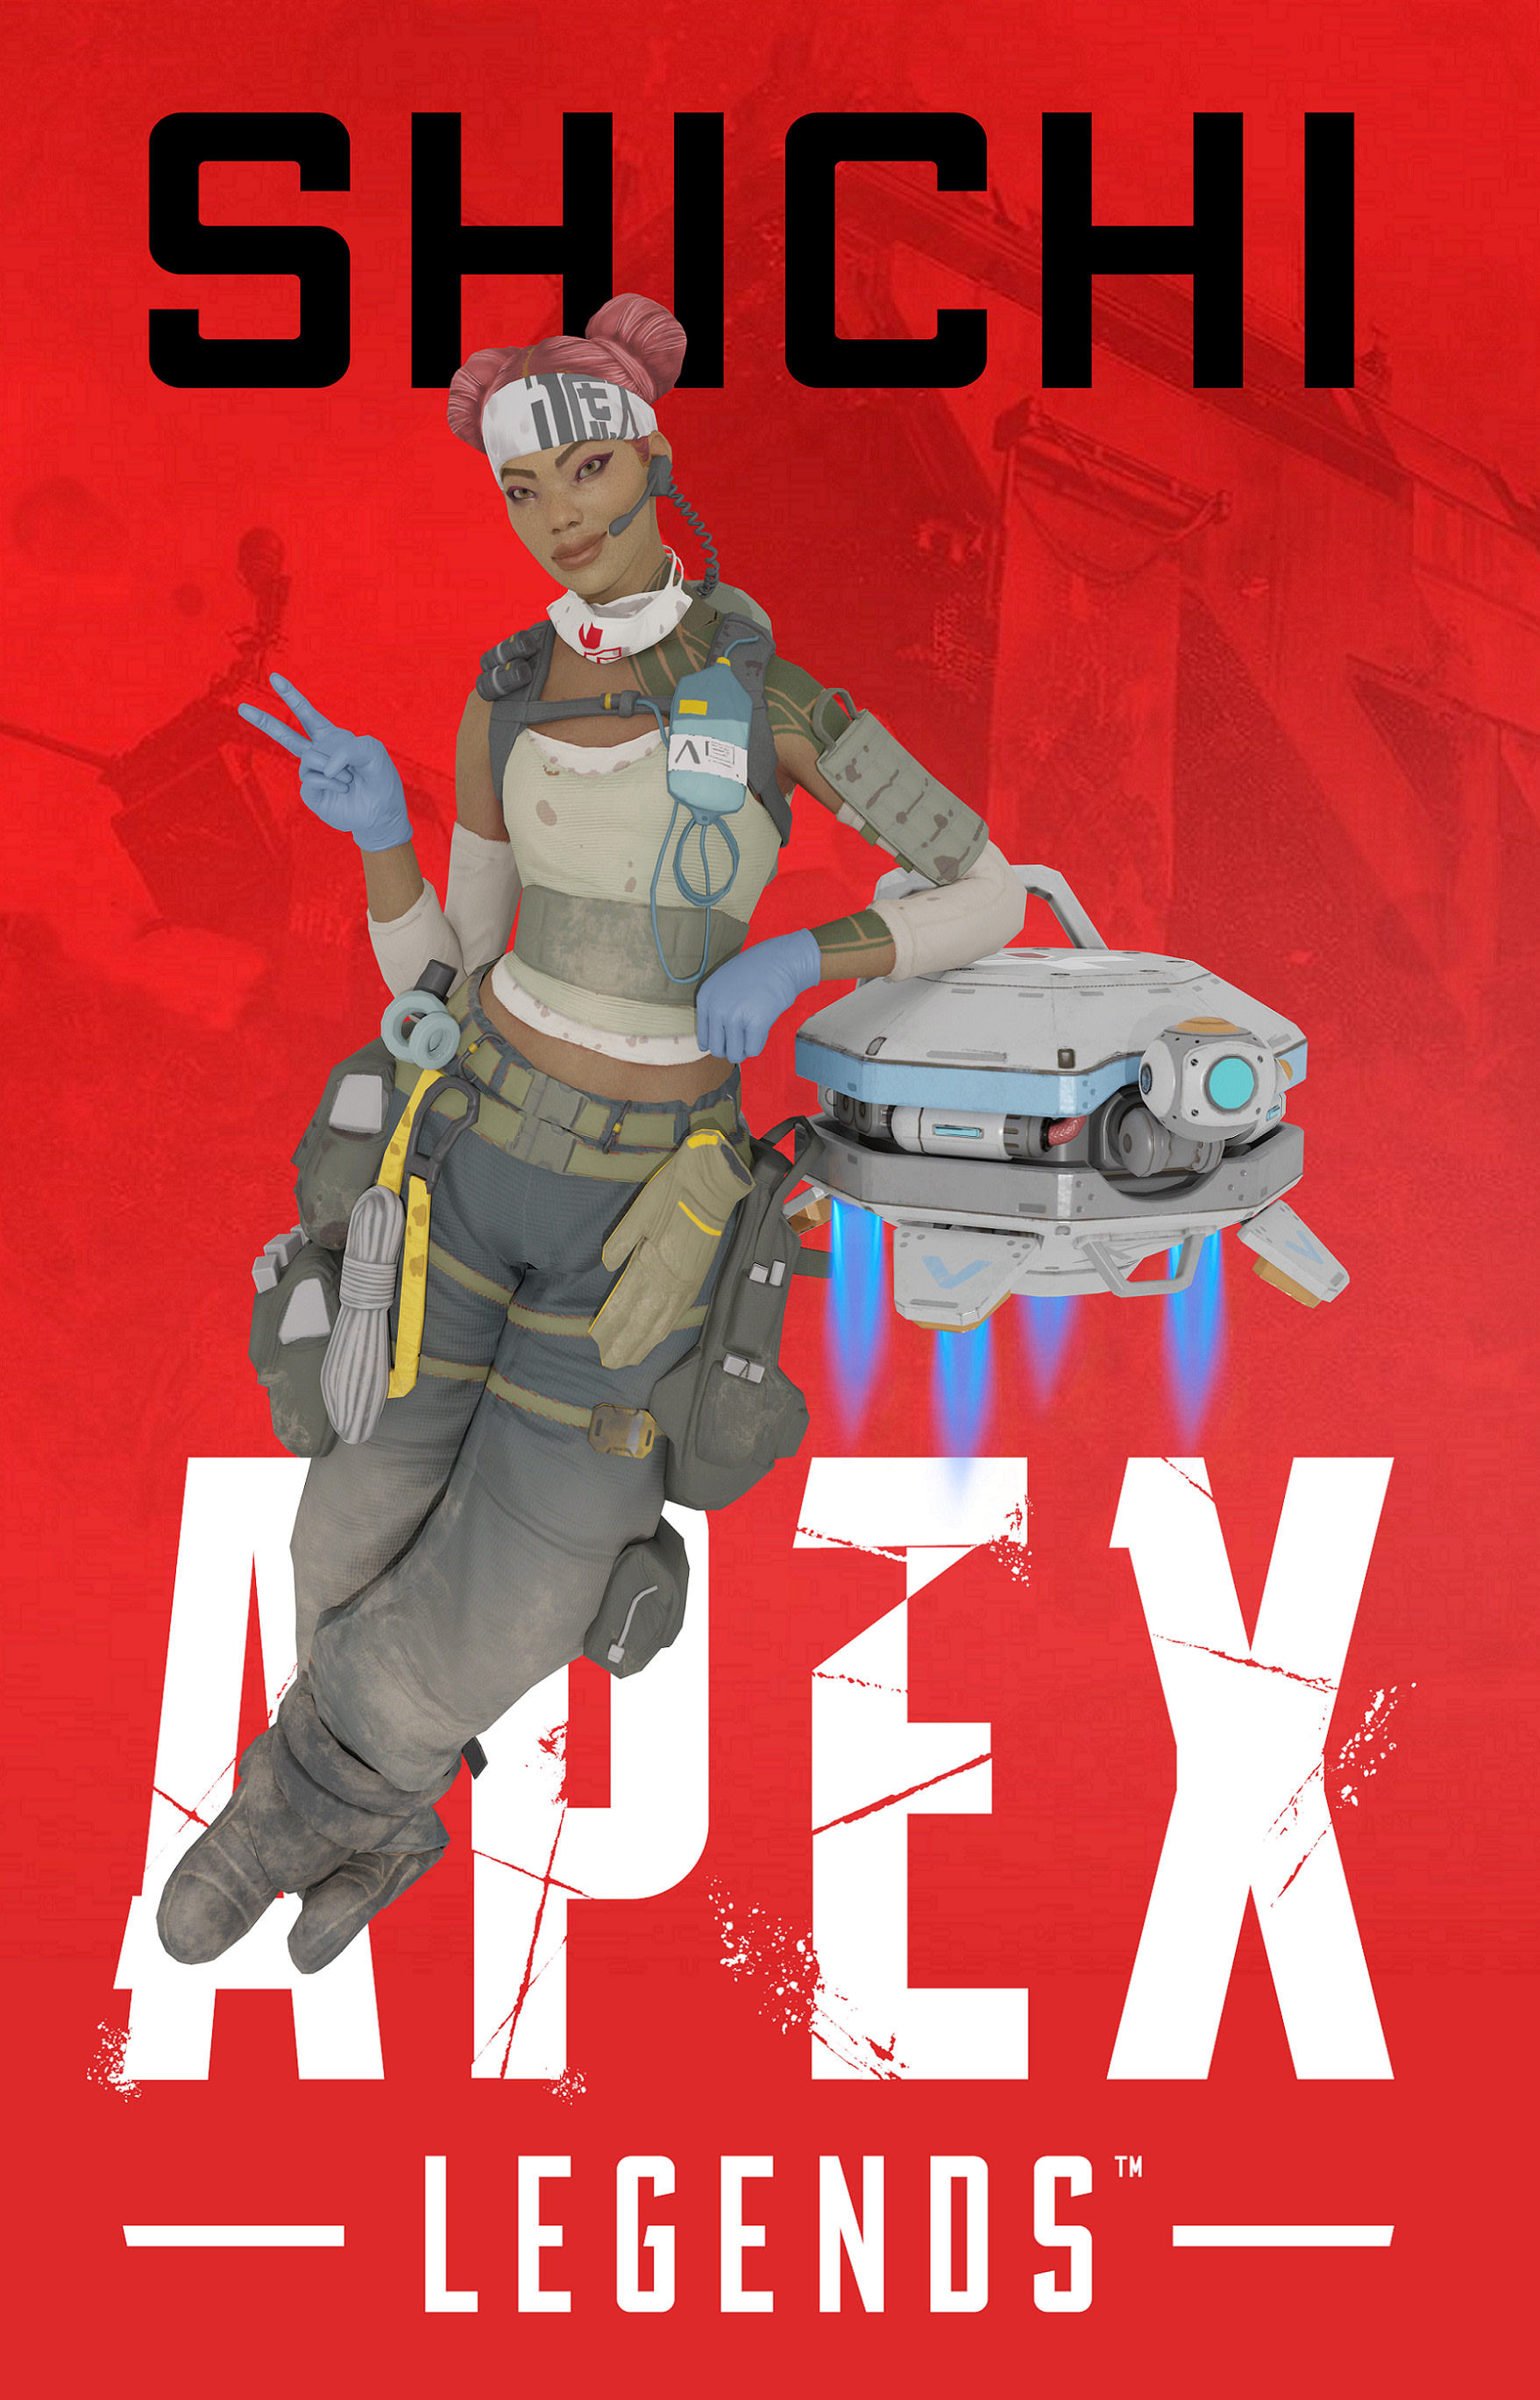 Poster of Apex Legends Wallpapers